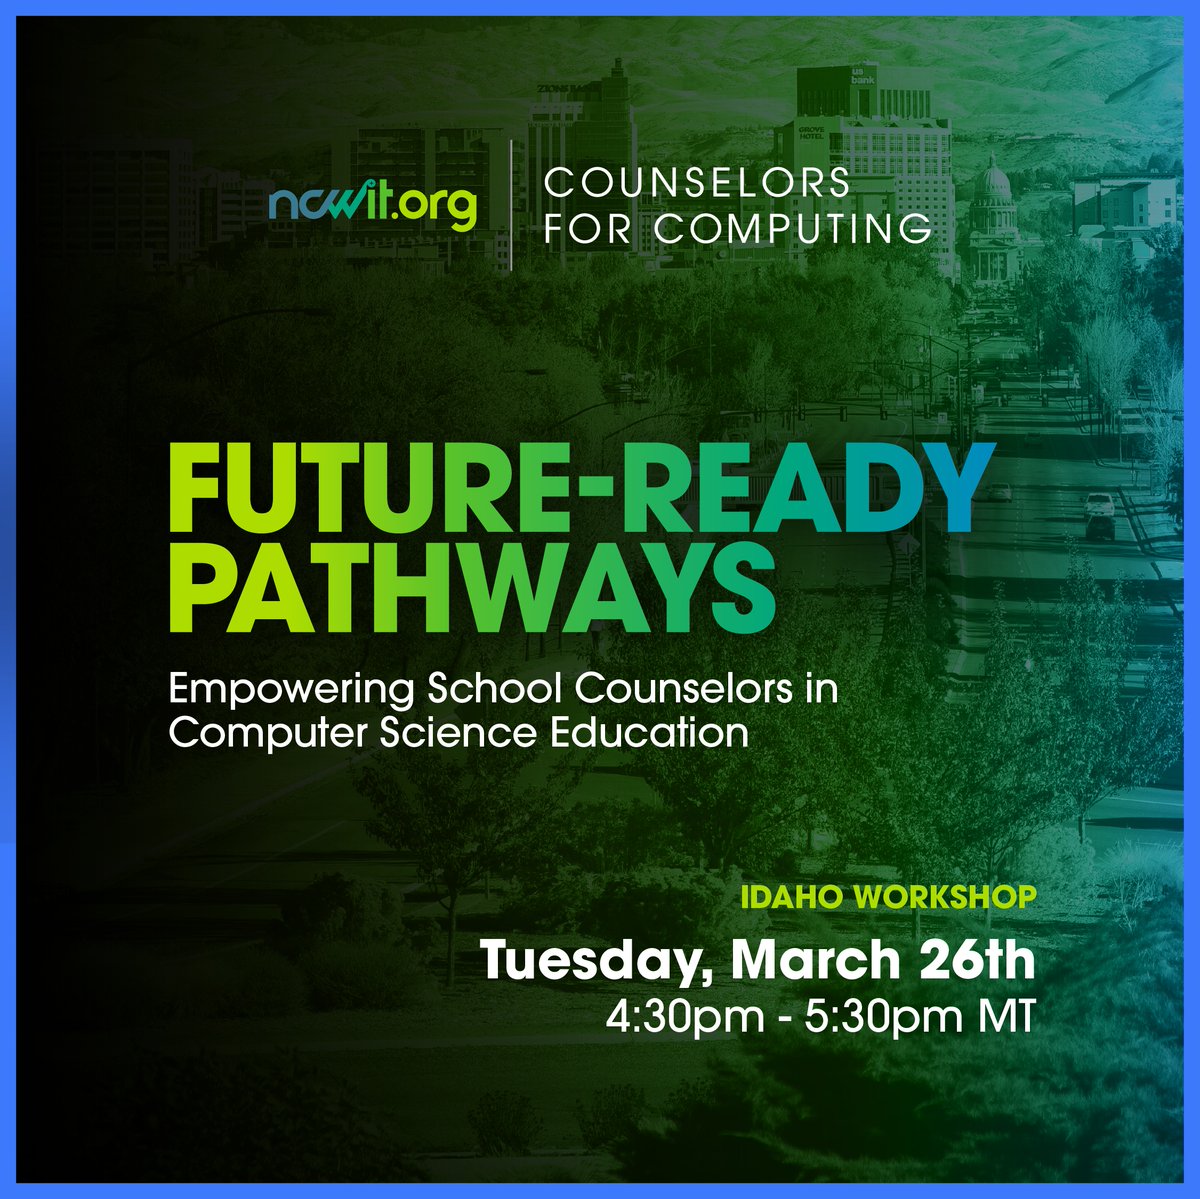 Just 1️⃣ week until the one-hour Future-Ready Pathways webinar: Empowering School Counselors in CS Education!

📅 March 26th

🕒 4:30 - 5:30 pm MT

Join us to amplify your impact as a counselor: bit.ly/IdahoC4CMarch2…

Open to ALL school and career counselors nationwide!